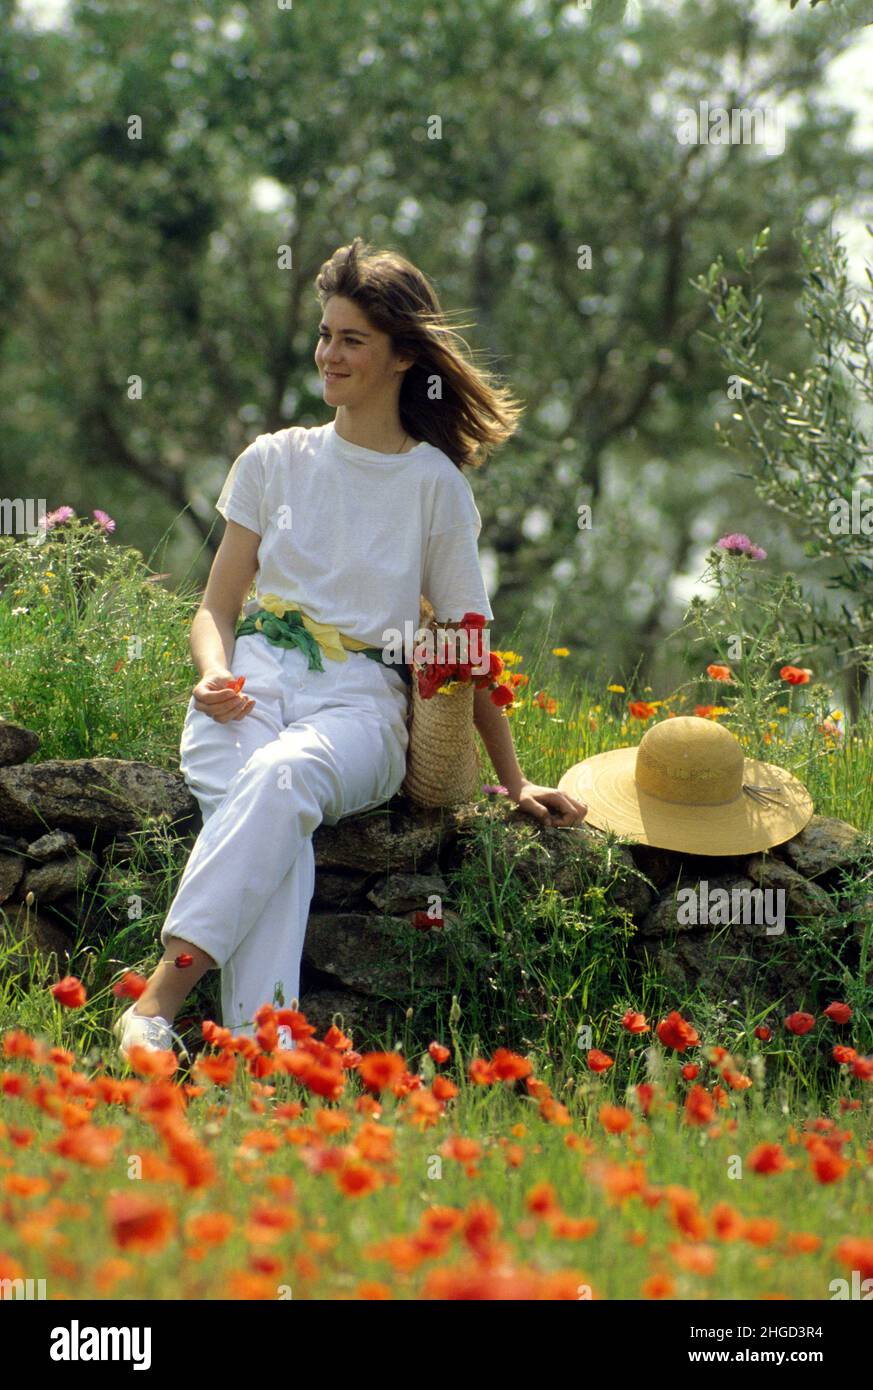 teenager on spring sit down on rocks country side poppies flowers champ straw hat Stock Photo